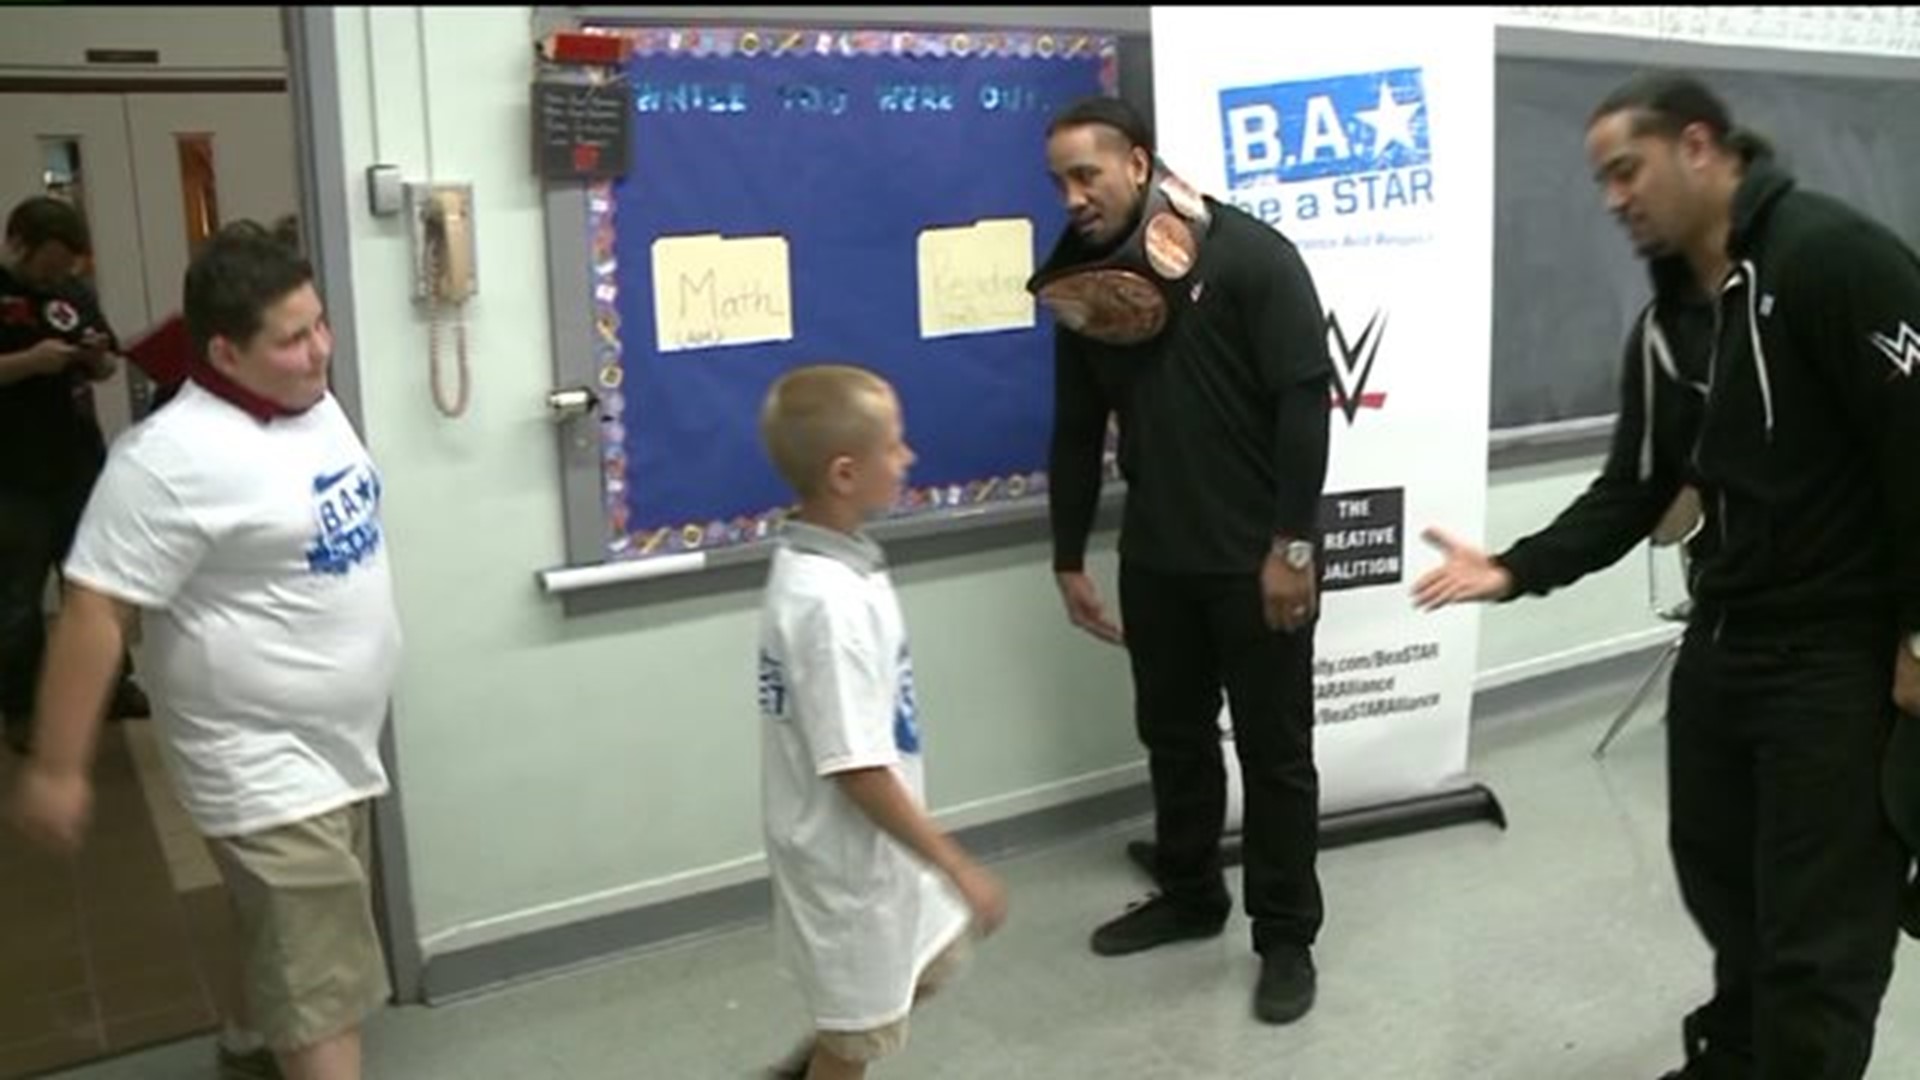 Wrestling Stars Host Anti-Bullying Event at School in Luzerne County